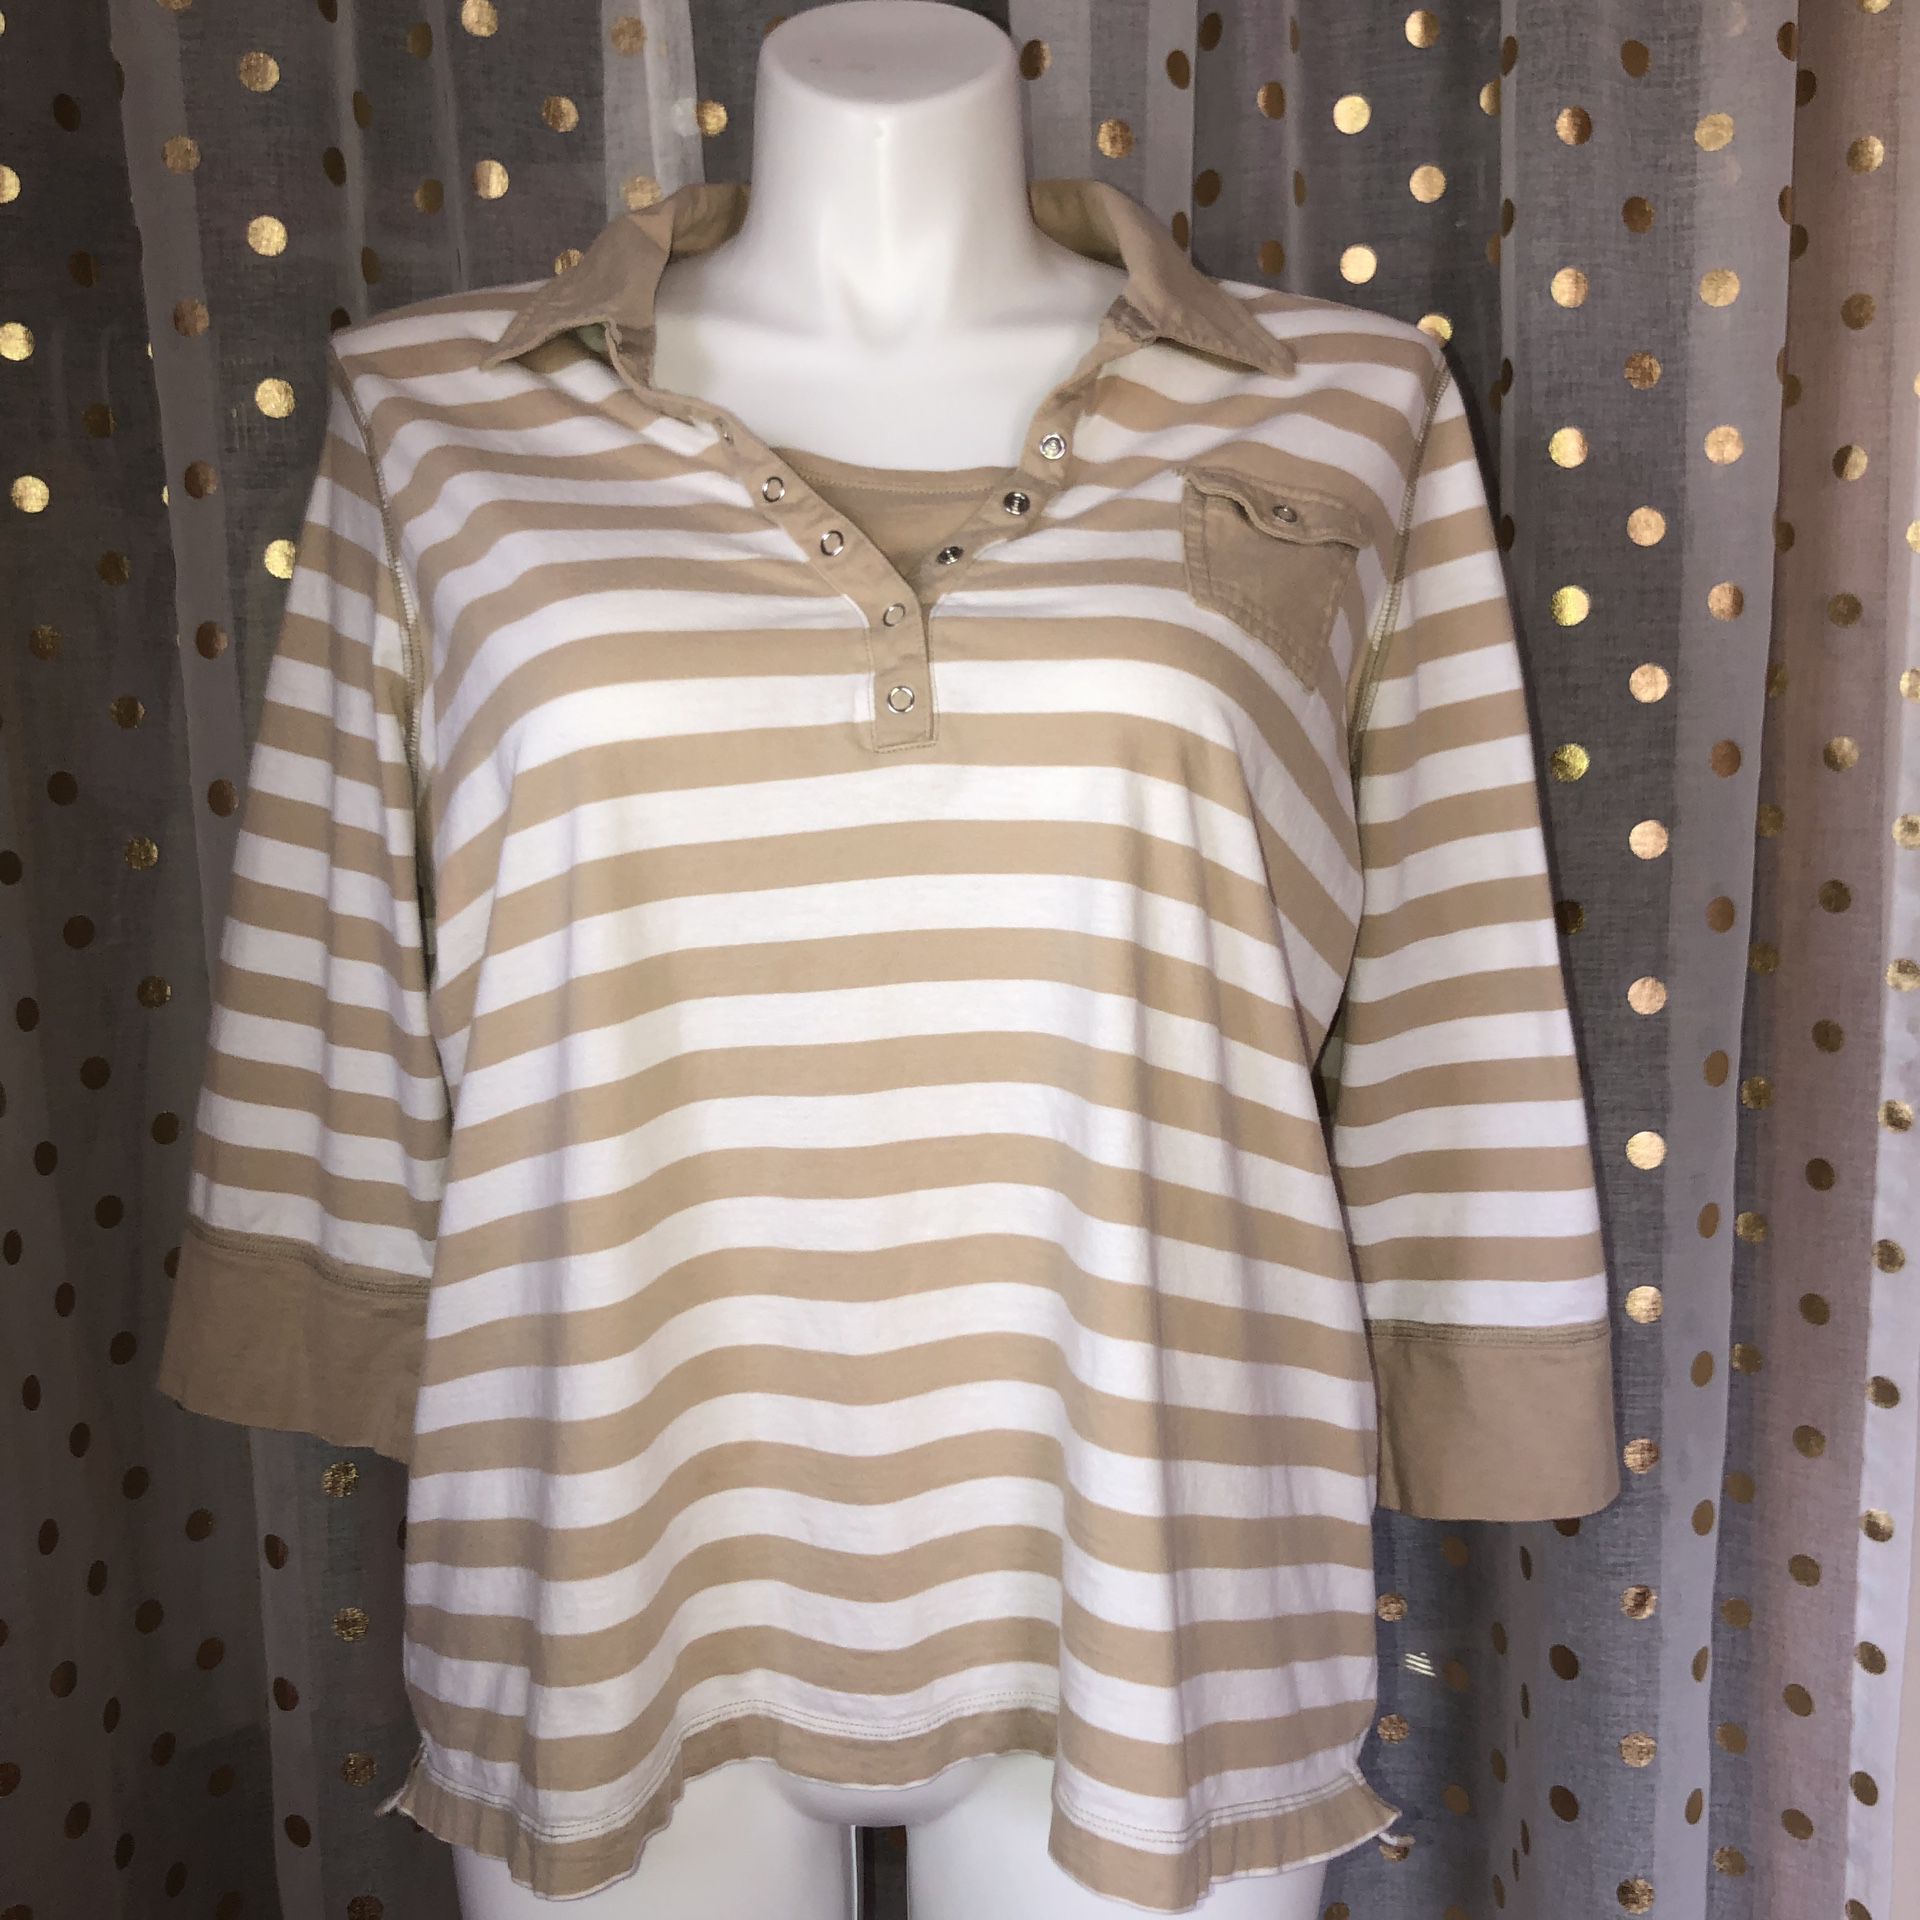 Tan and white striped 3/4 length sleeves collared shirt